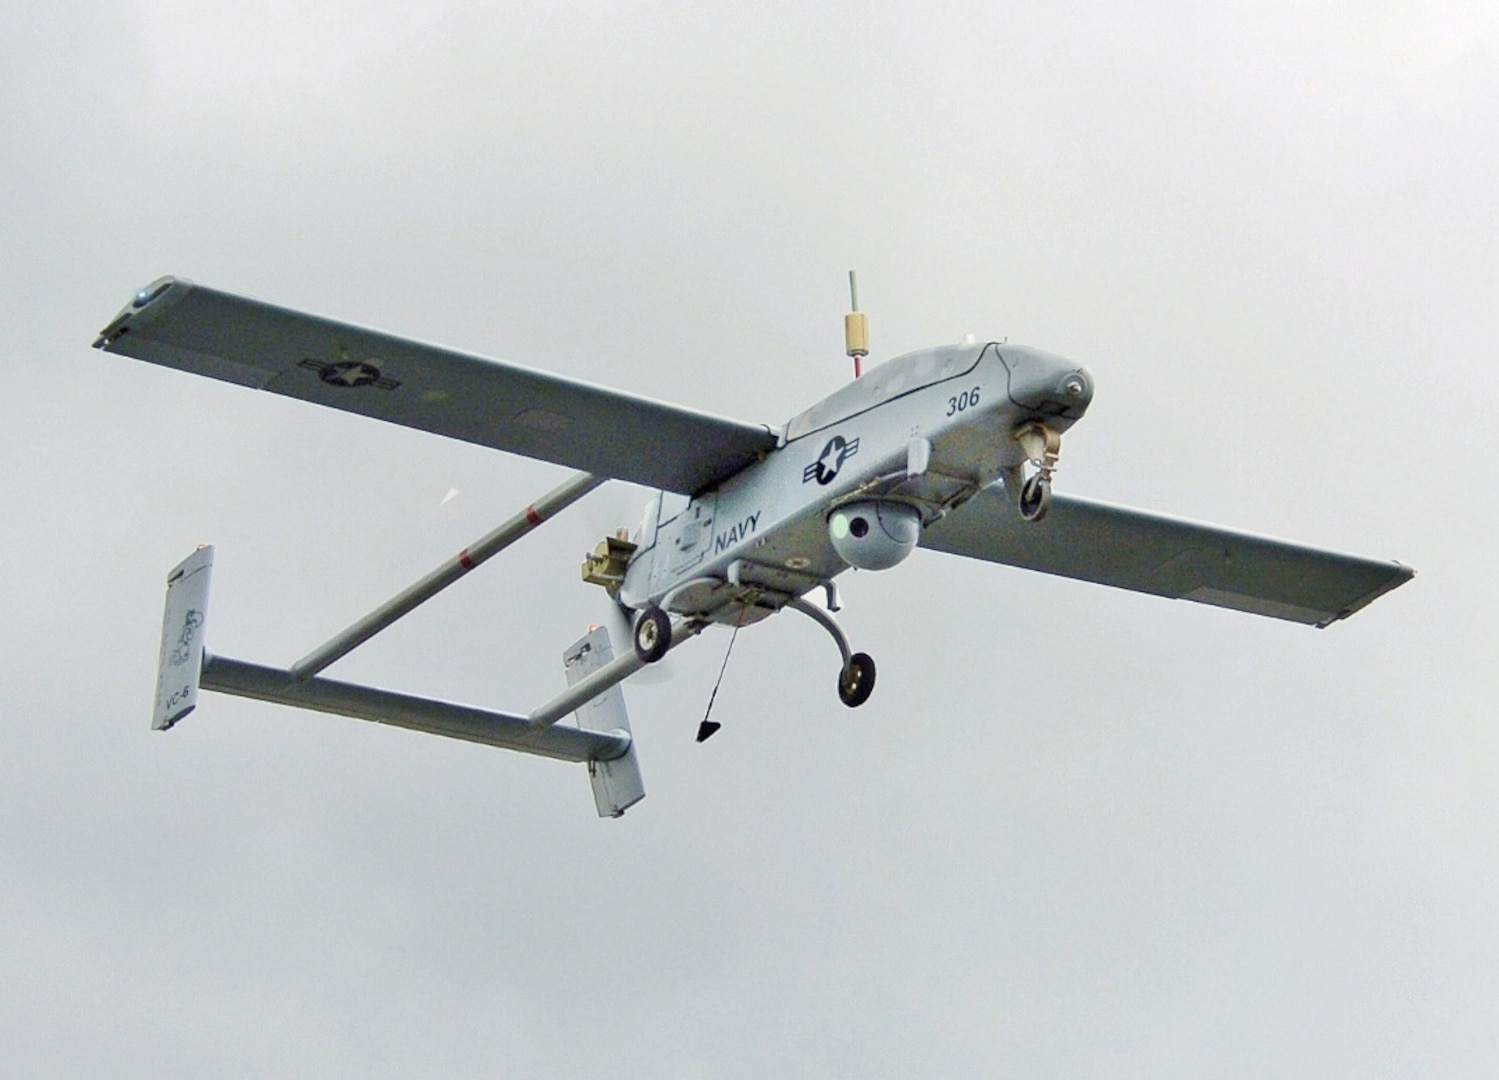 Unmanned Aerial Vehicles (UAVs) A Model for Joint Weapons Systems